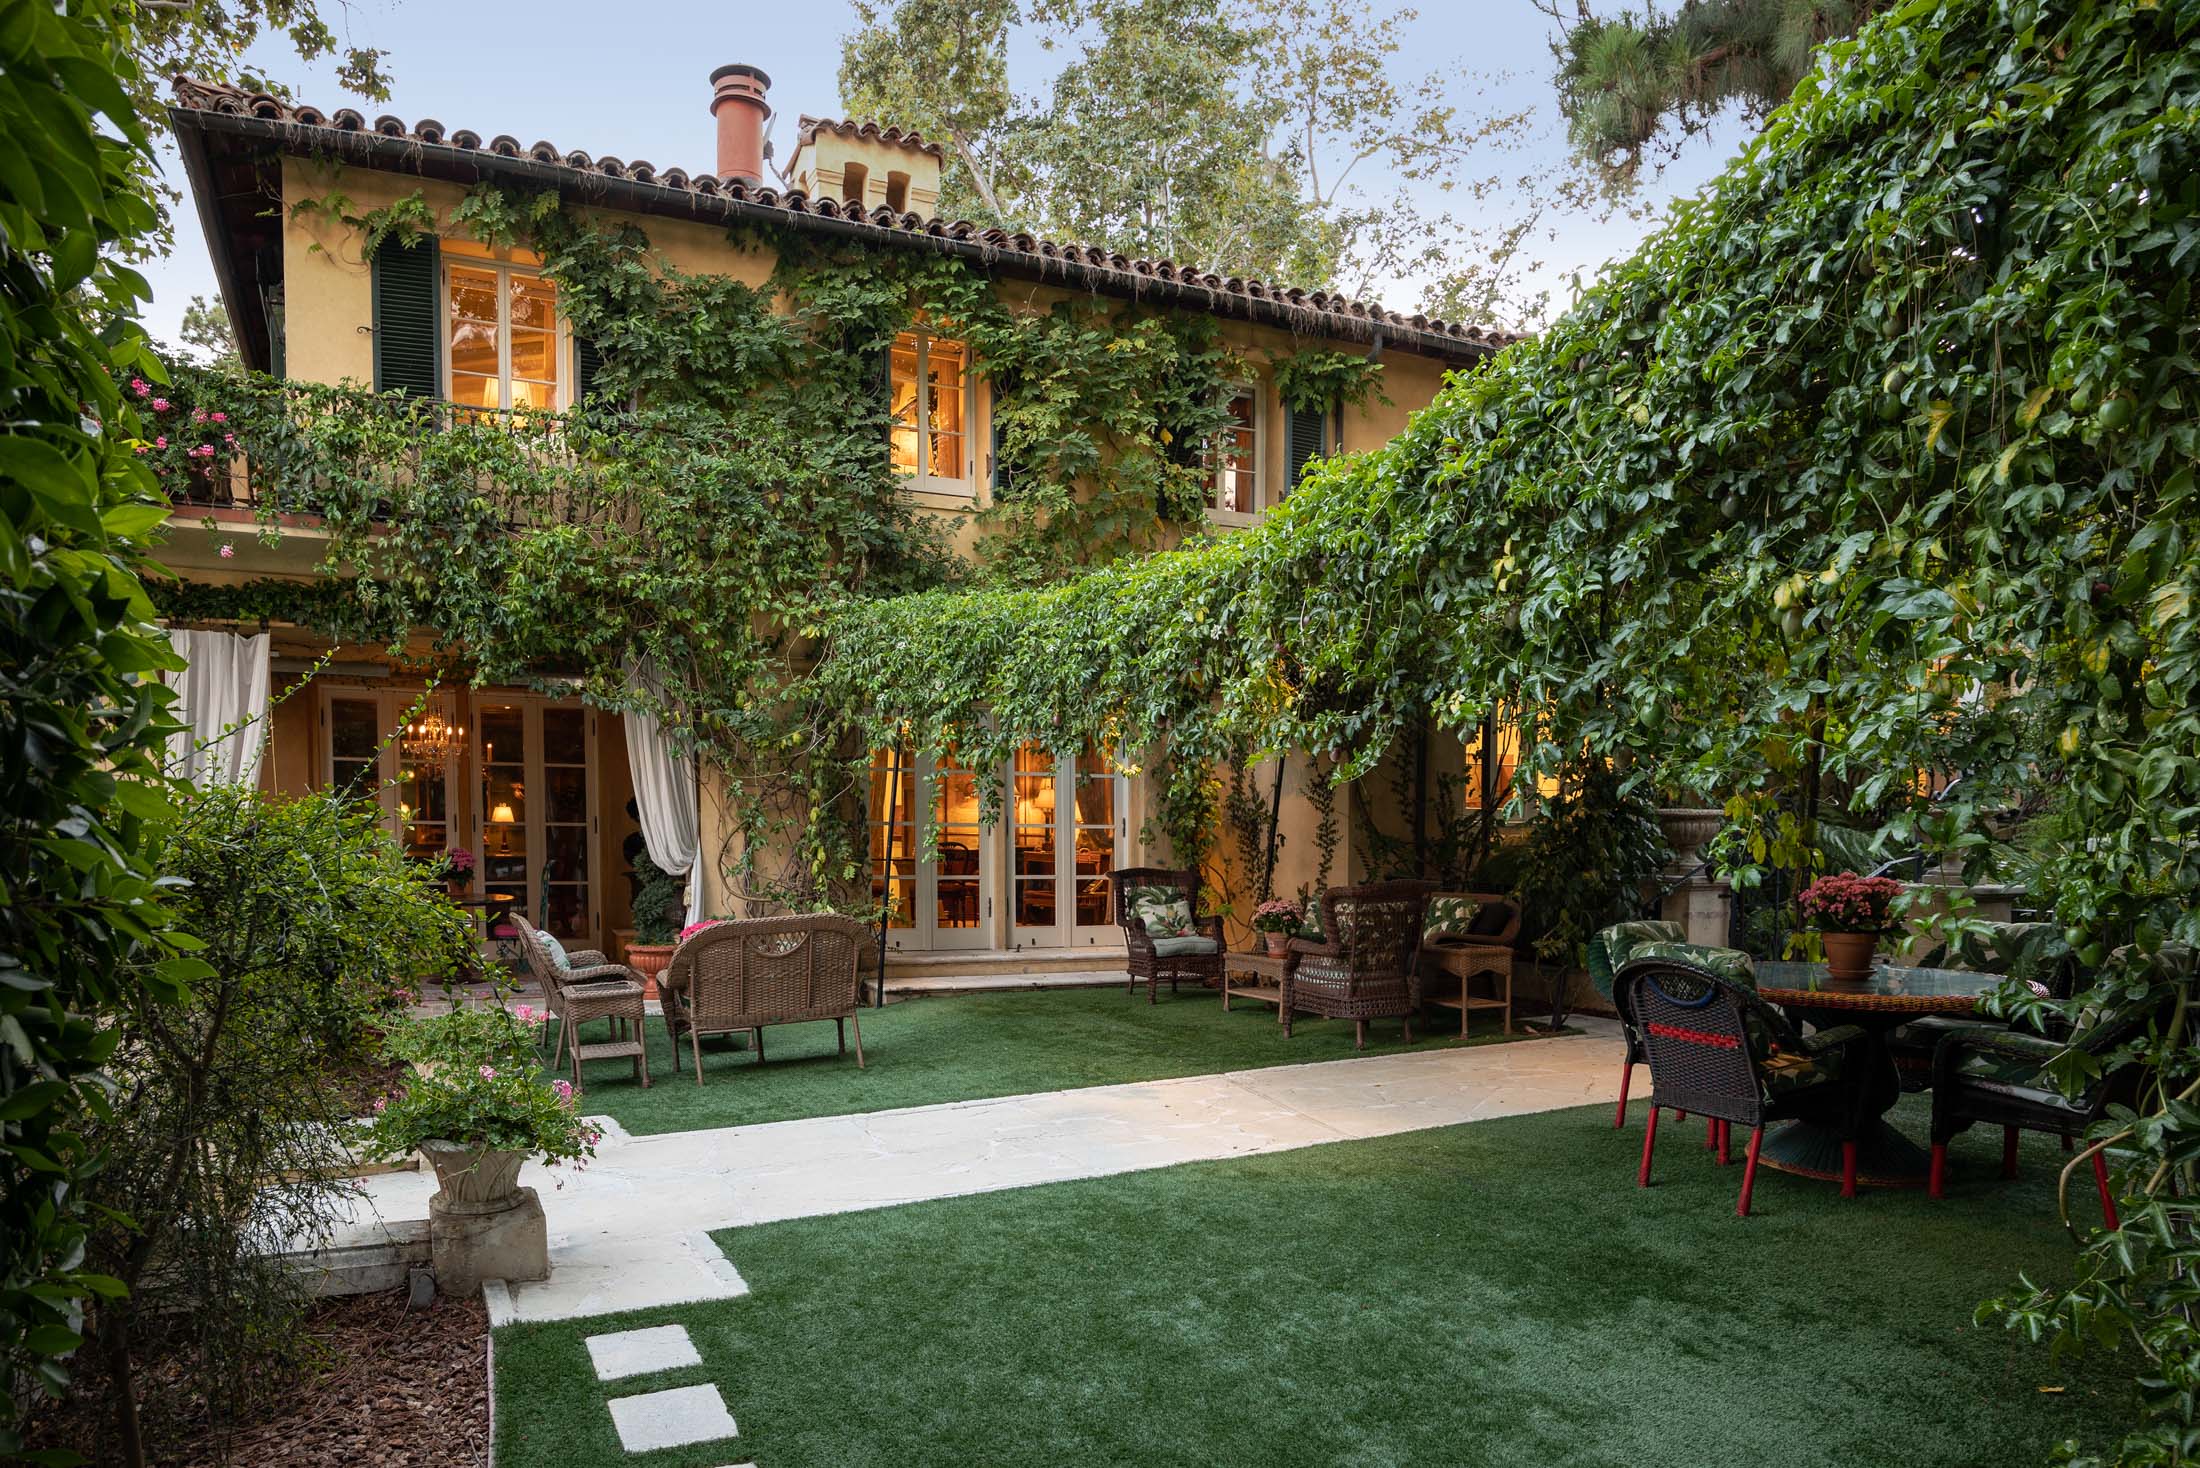 The property’s main house was inspired by a Tuscan villa.